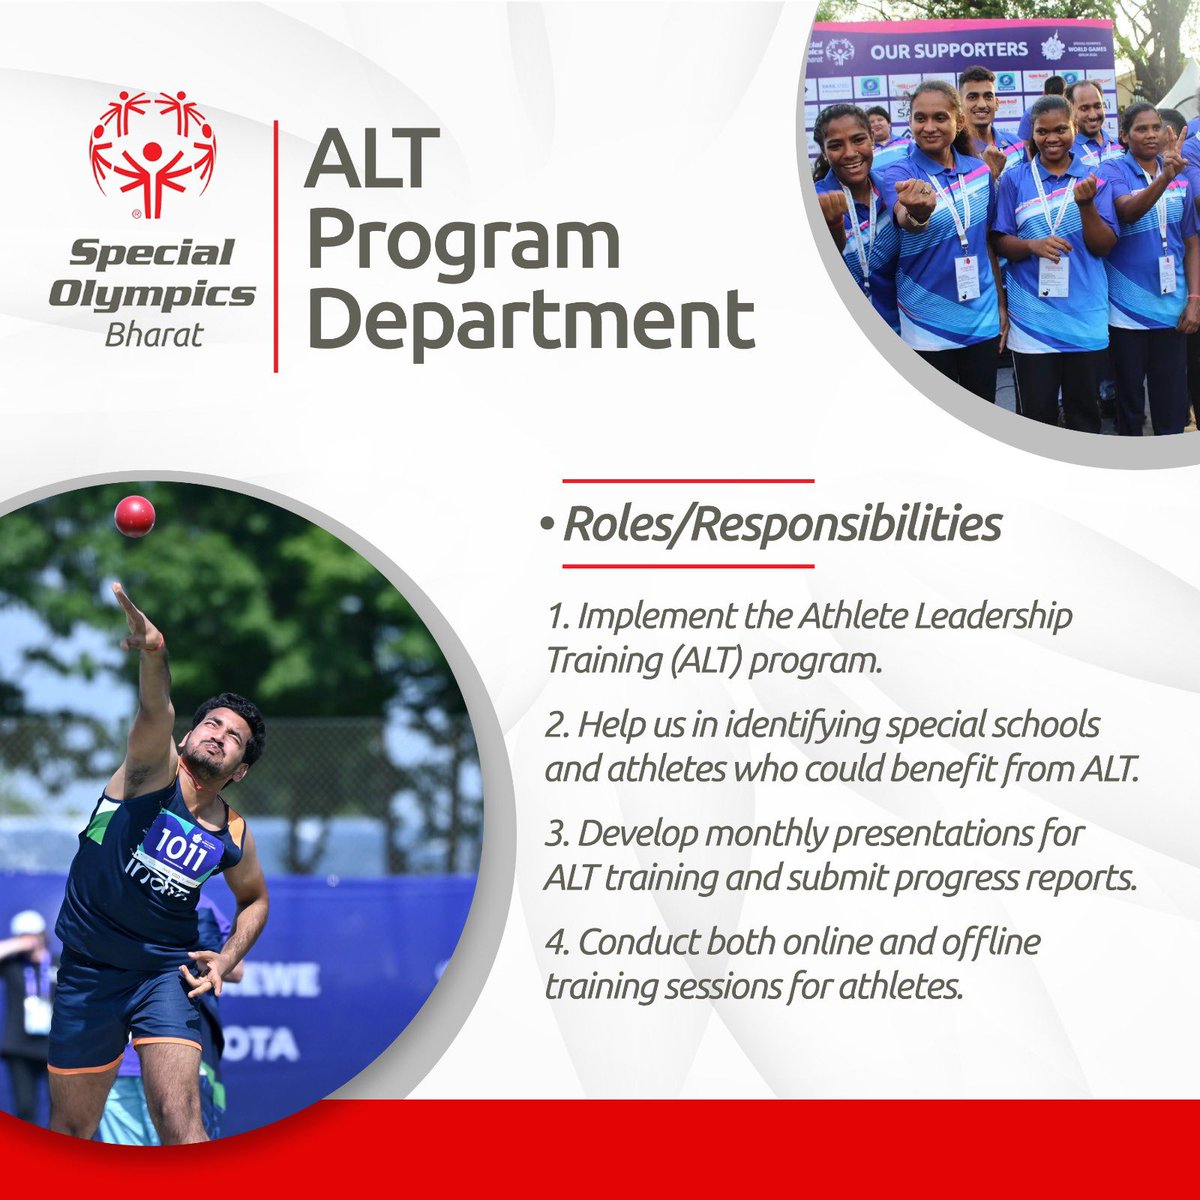 Ready to make a difference in the society!? Join our ALT team and be a catalyst for transformation. With a focus on holistic athlete development, you'll help empower individuals to overcome challenges and thrive in all aspects of life. #InclusionForAll #Champion